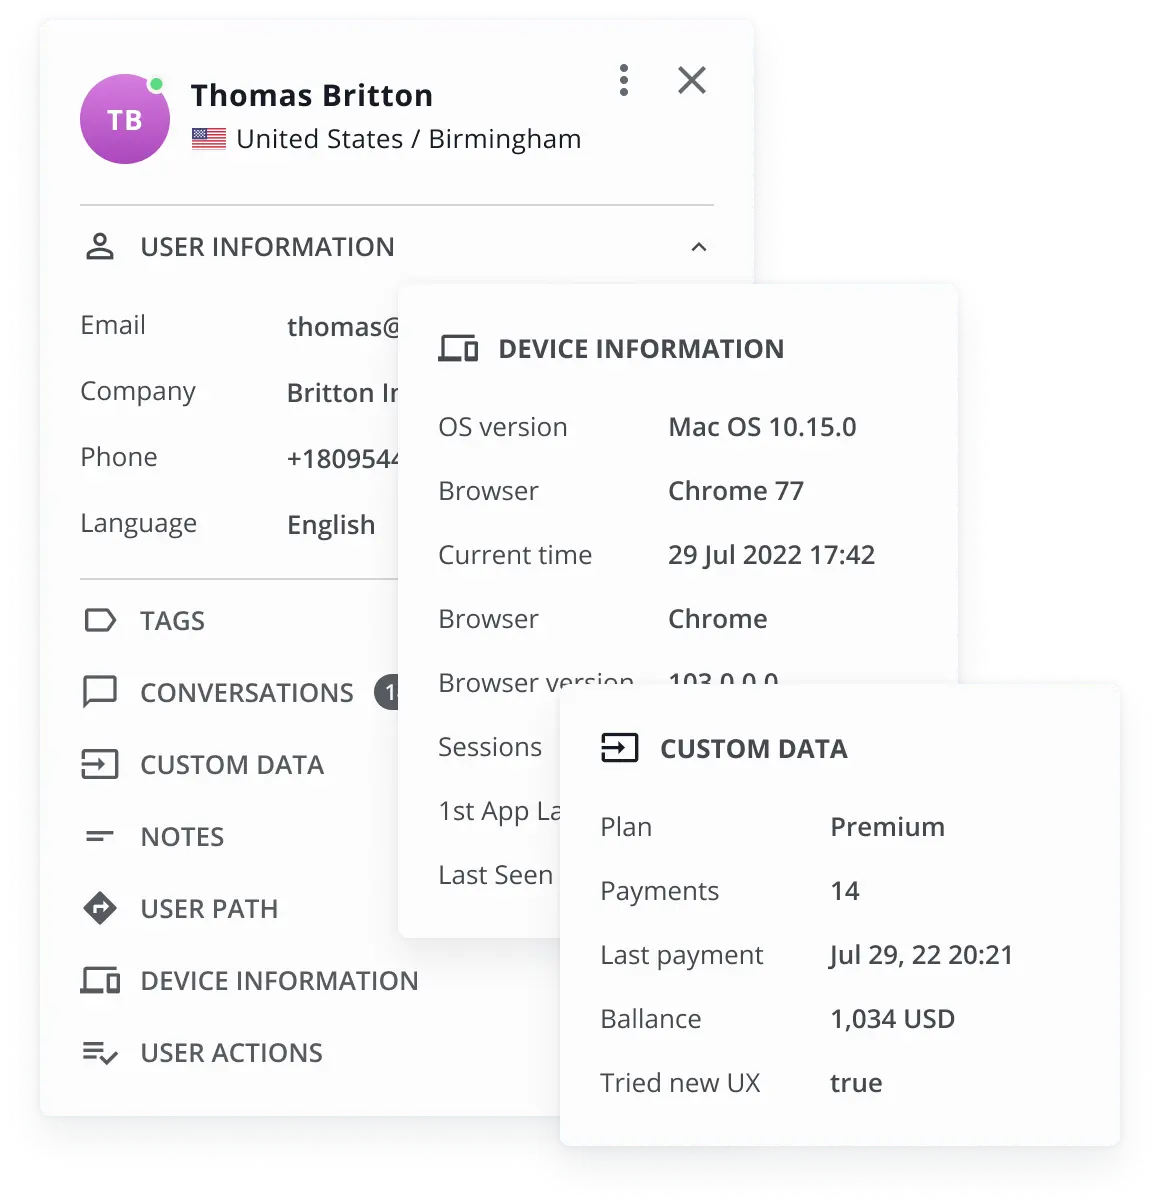 User profile from the HelpCrunch shared inbox containing detailed user information